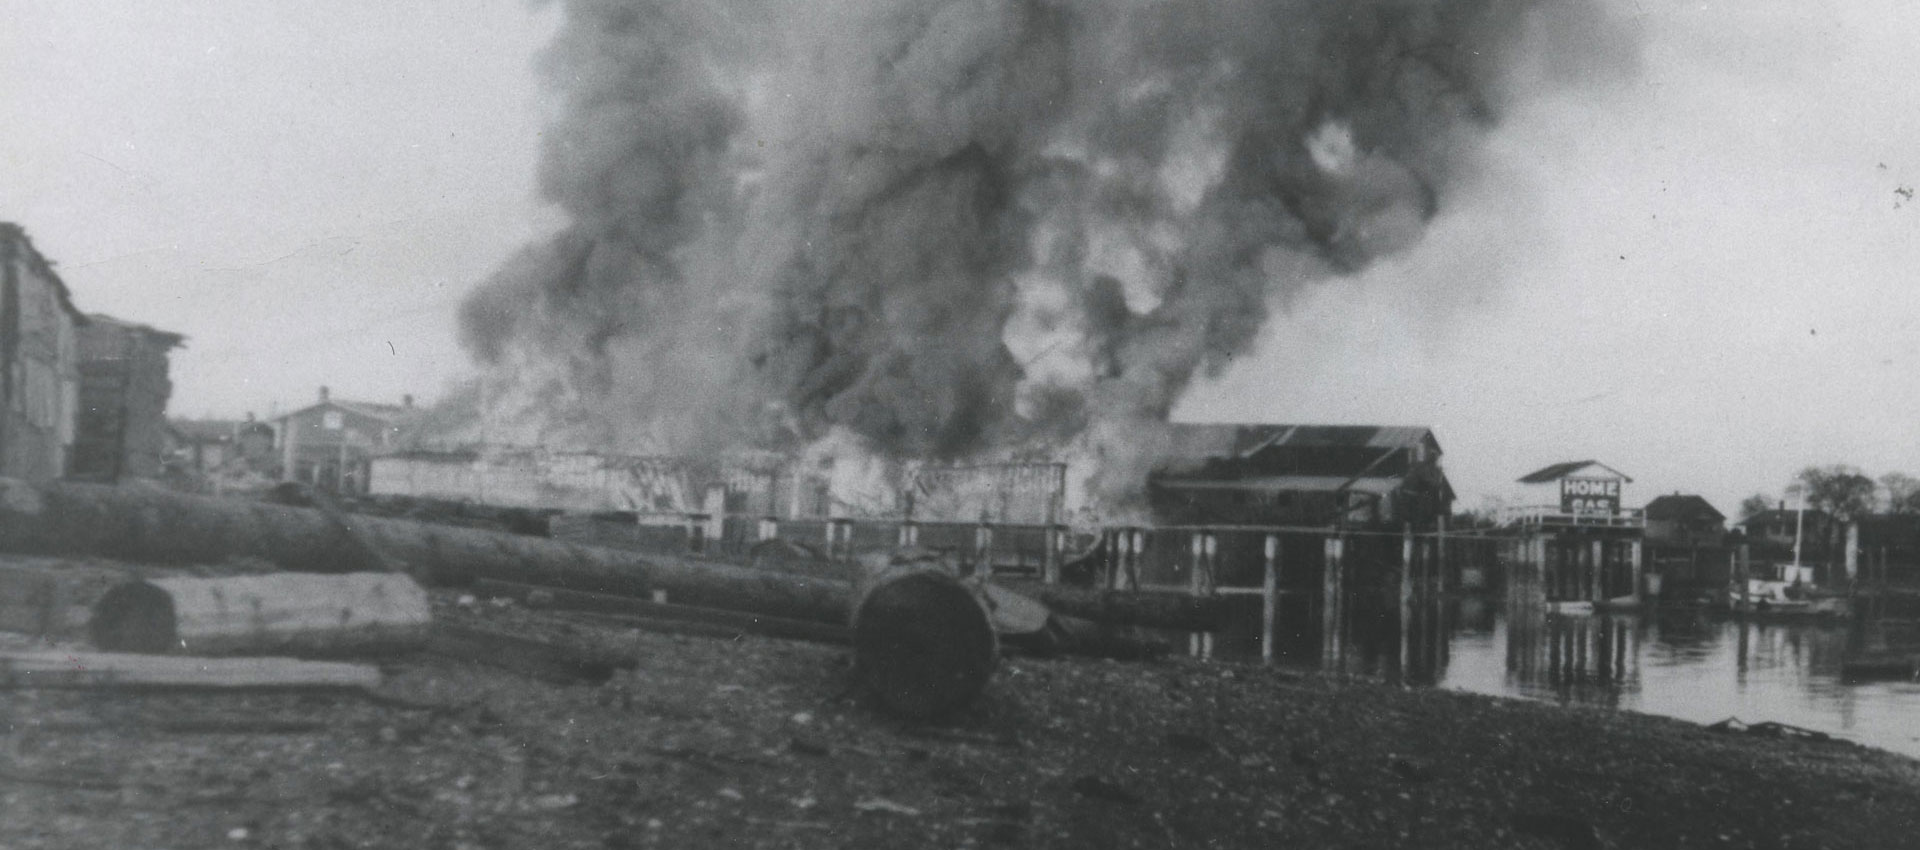 Large plume of dark smoke is rising from a cannery building.